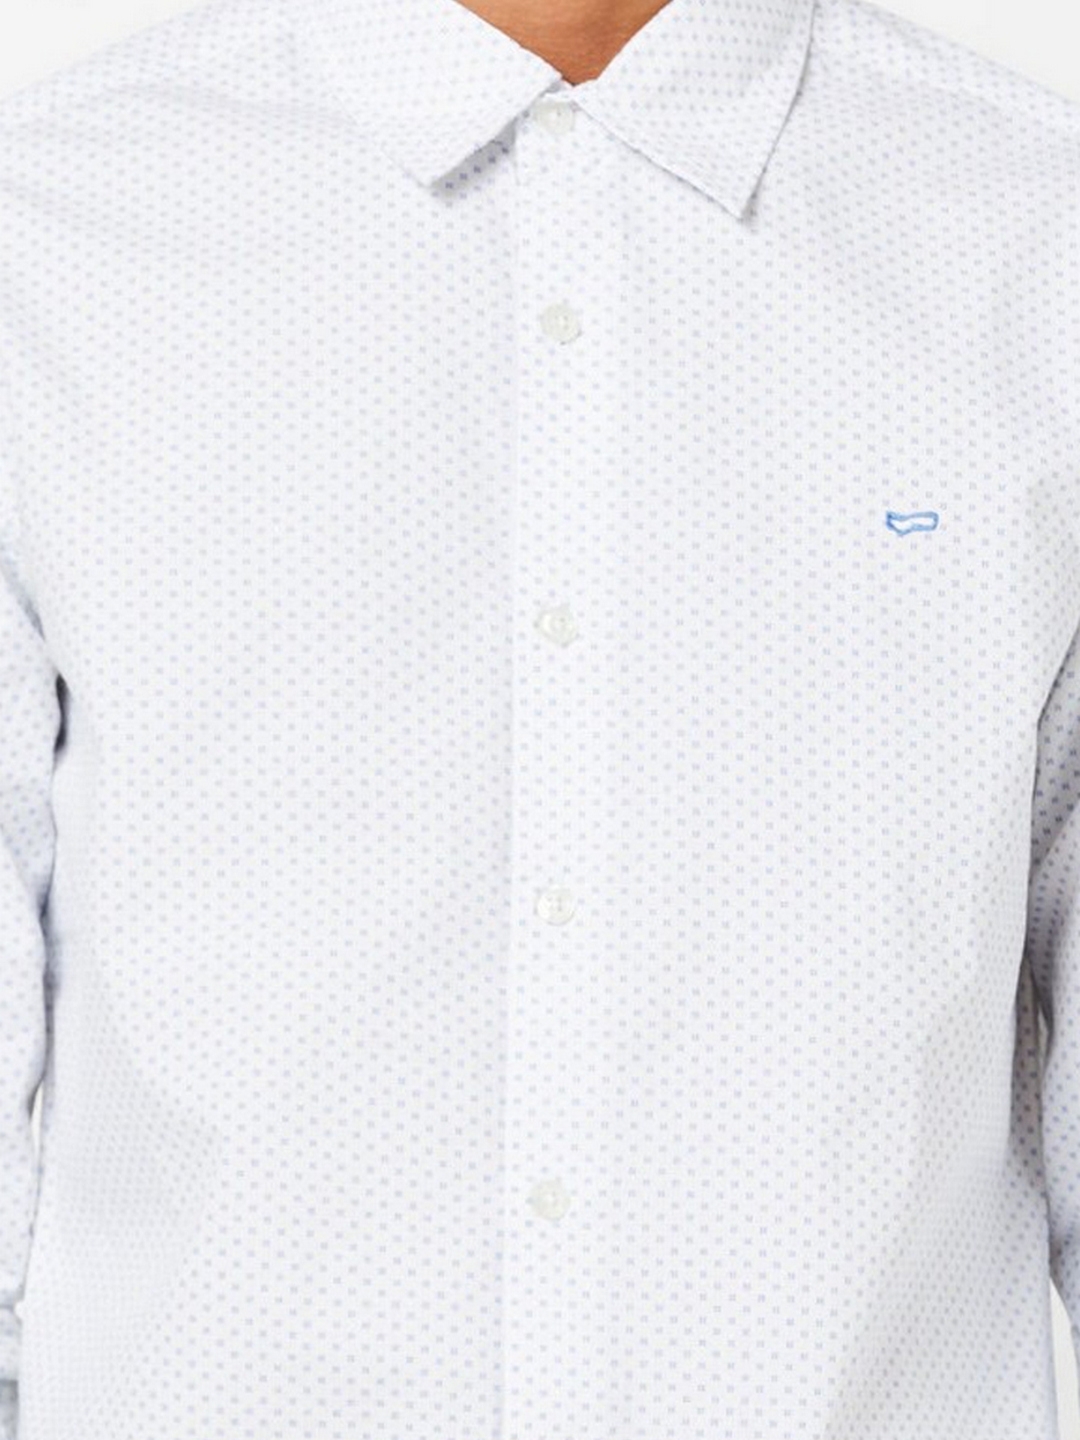 Micro Print Slim Fit Shirt with Spread Collar